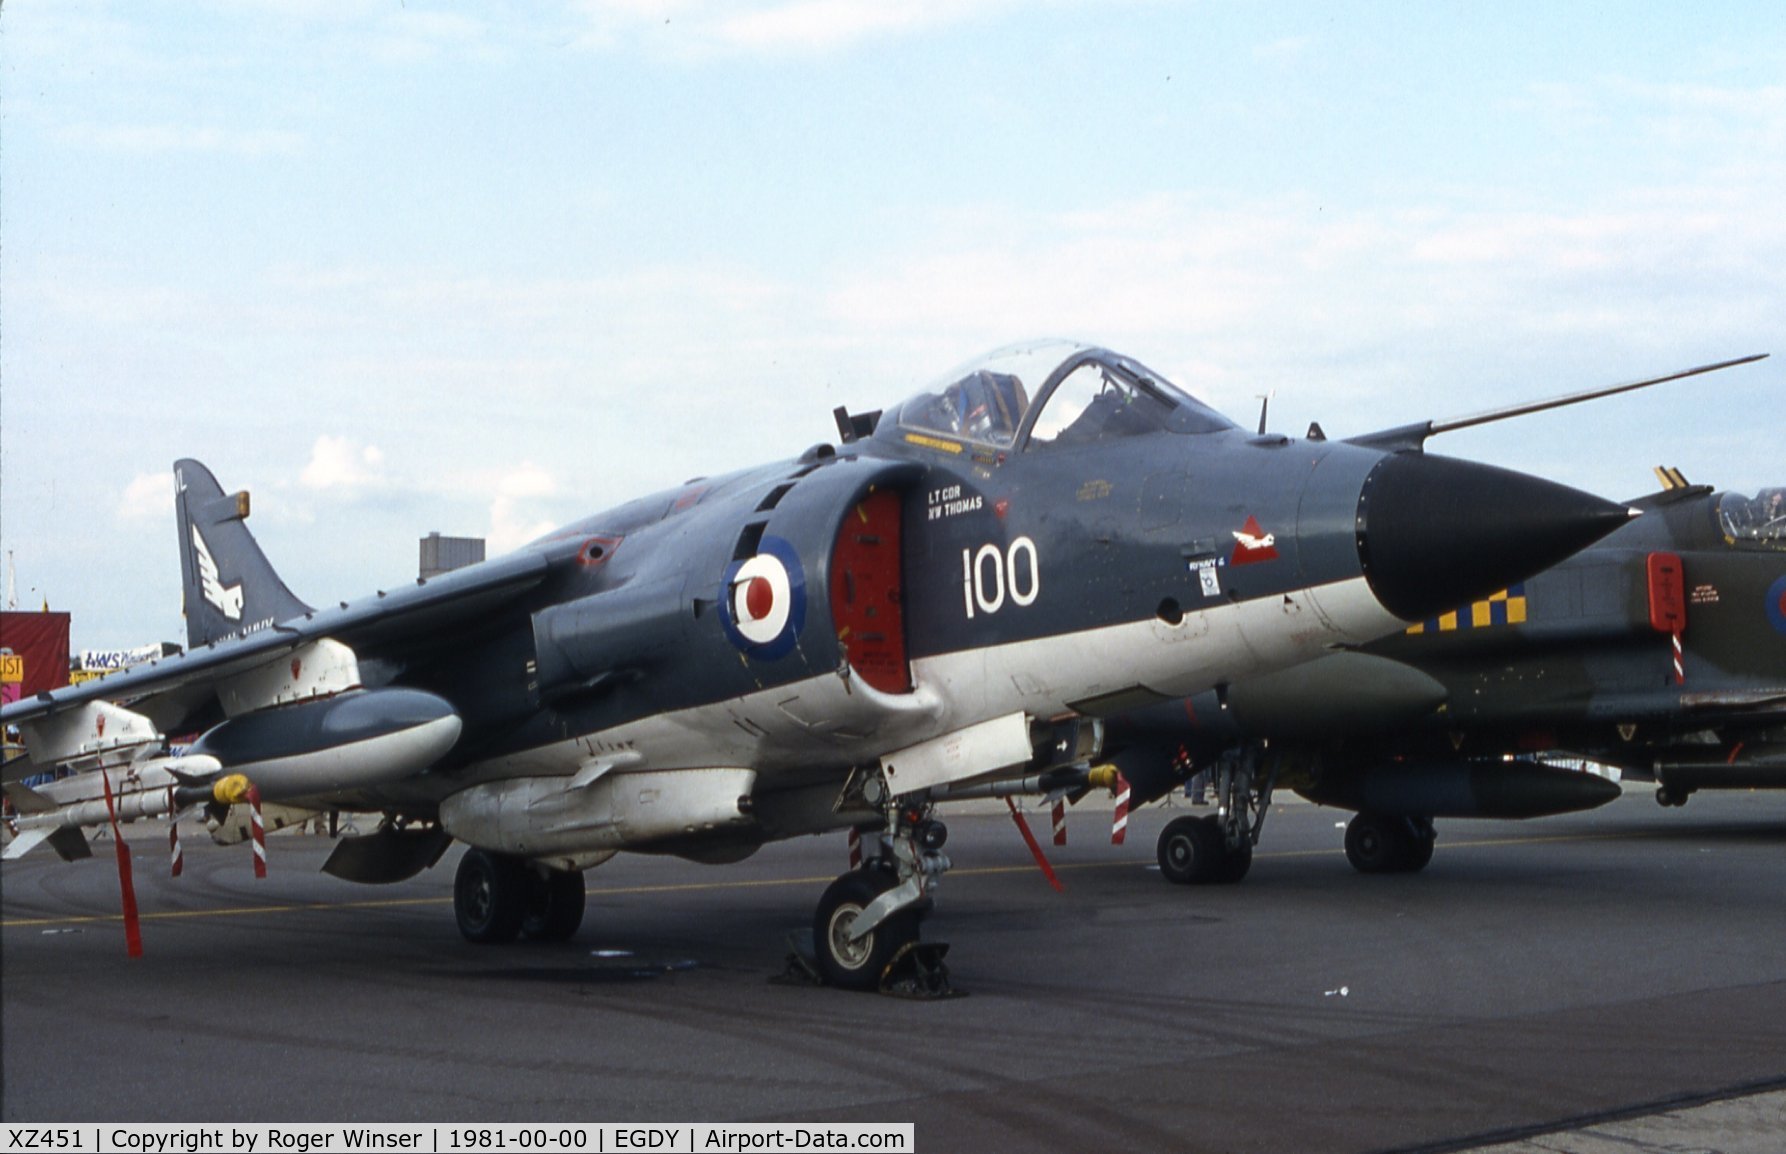 XZ451, 1979 British Aerospace Sea Harrier FRS.1 C/N 41H-912005, Coded 100/VL of 899 NAS at RNAS Yeovilton Naval Air Day in 1981?